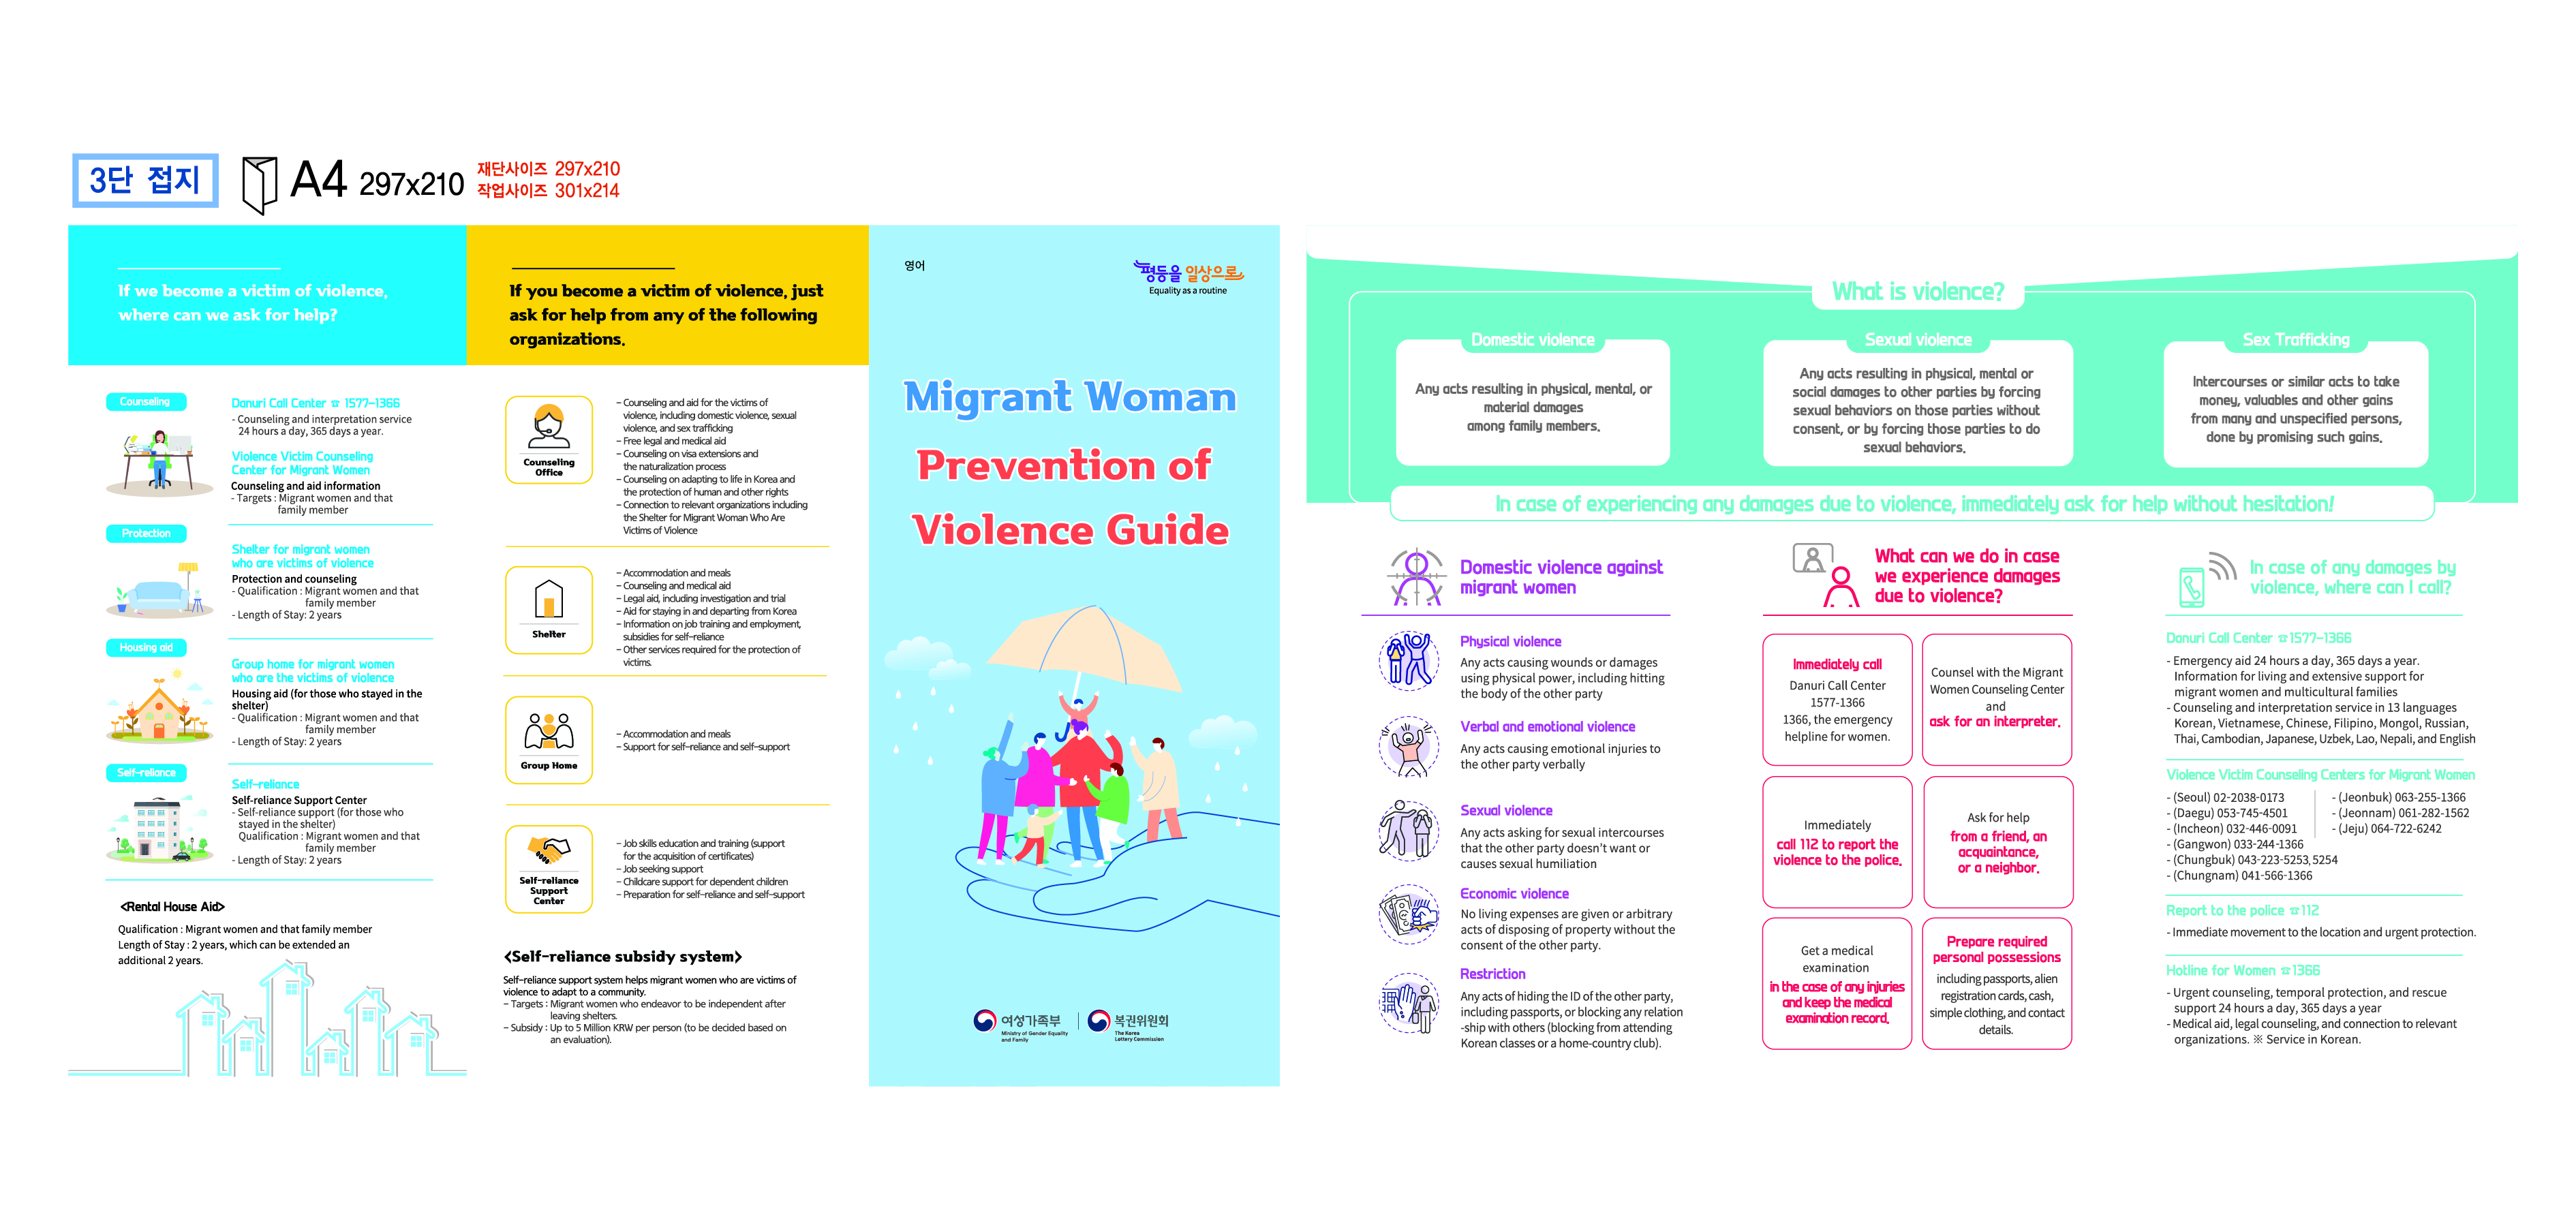 Prevention of Violence Guide for Immigrant Women